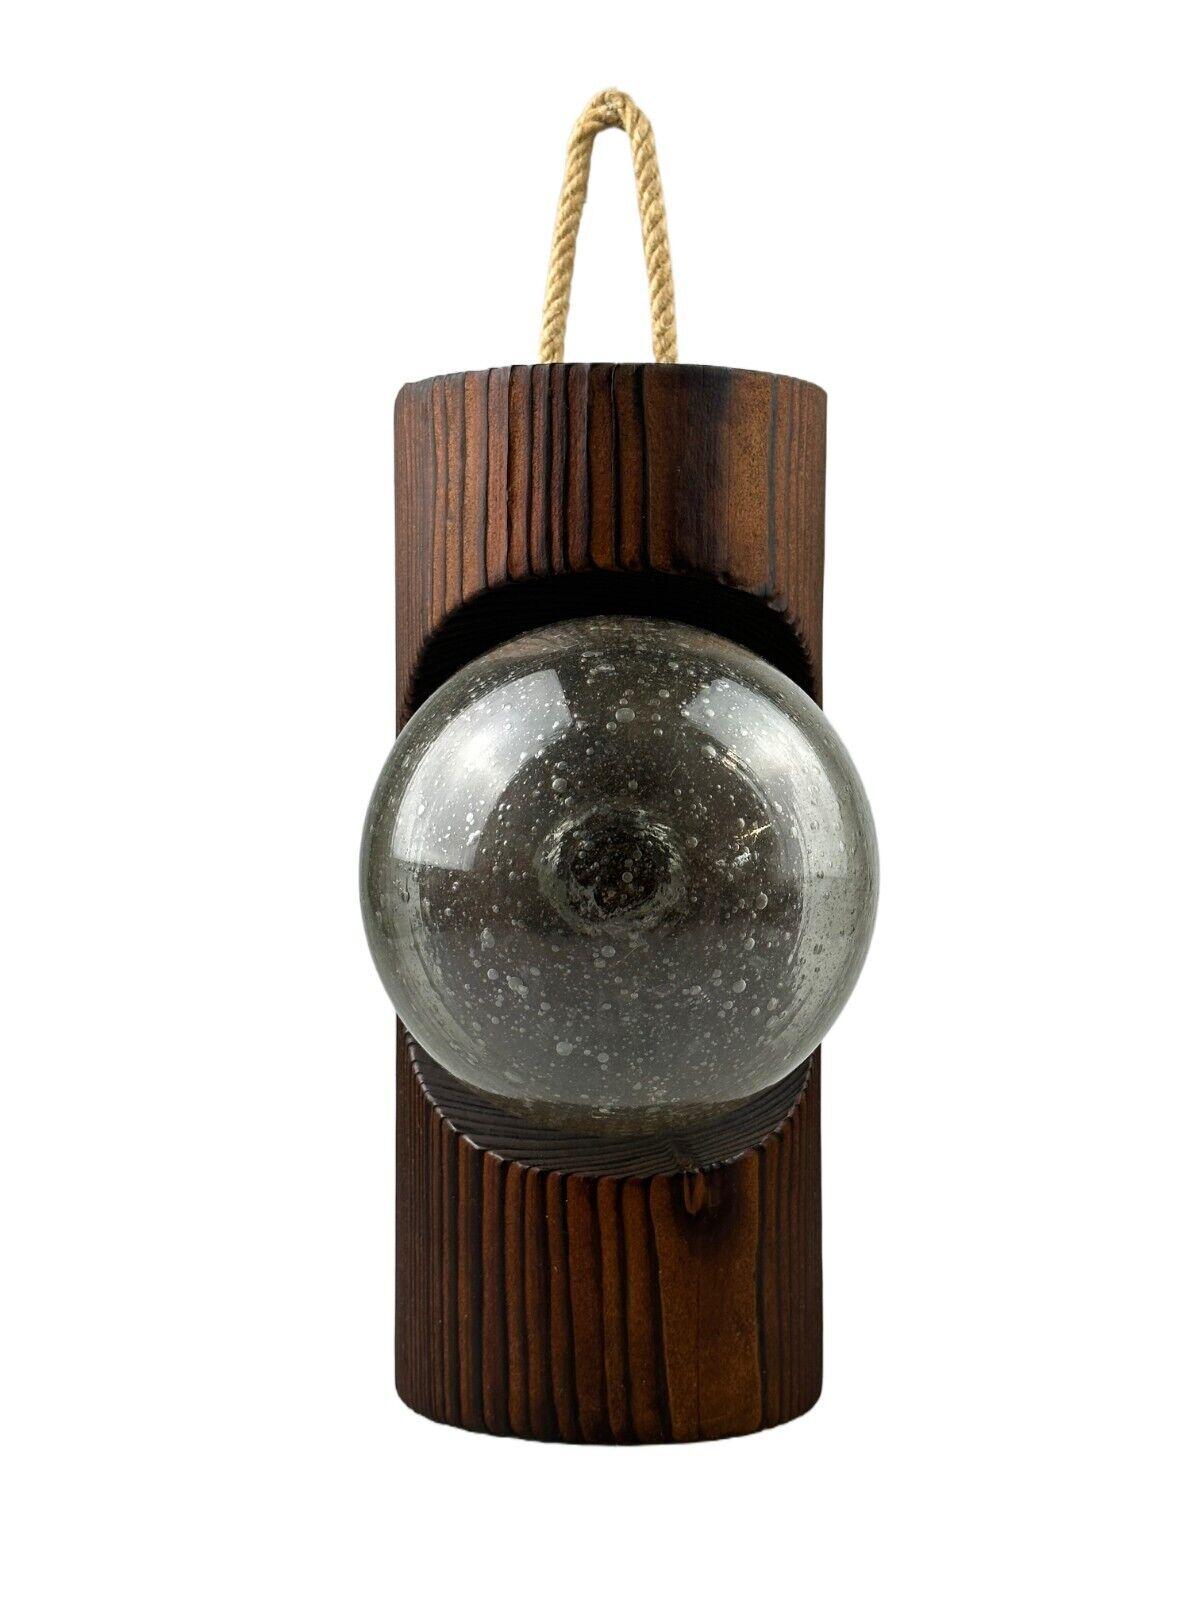 60s 70s Wall Lamp Wood Glass Wall Sconce Brutalist Temde Leuchten Switzerland

Object: wall lamp

Manufacturer: Temde

Condition: good

Age: around 1960-1970

Dimensions:

Width = 14.5cm
Height = 32cm
Depth = 22cm

Other notes:

E14 socket

The